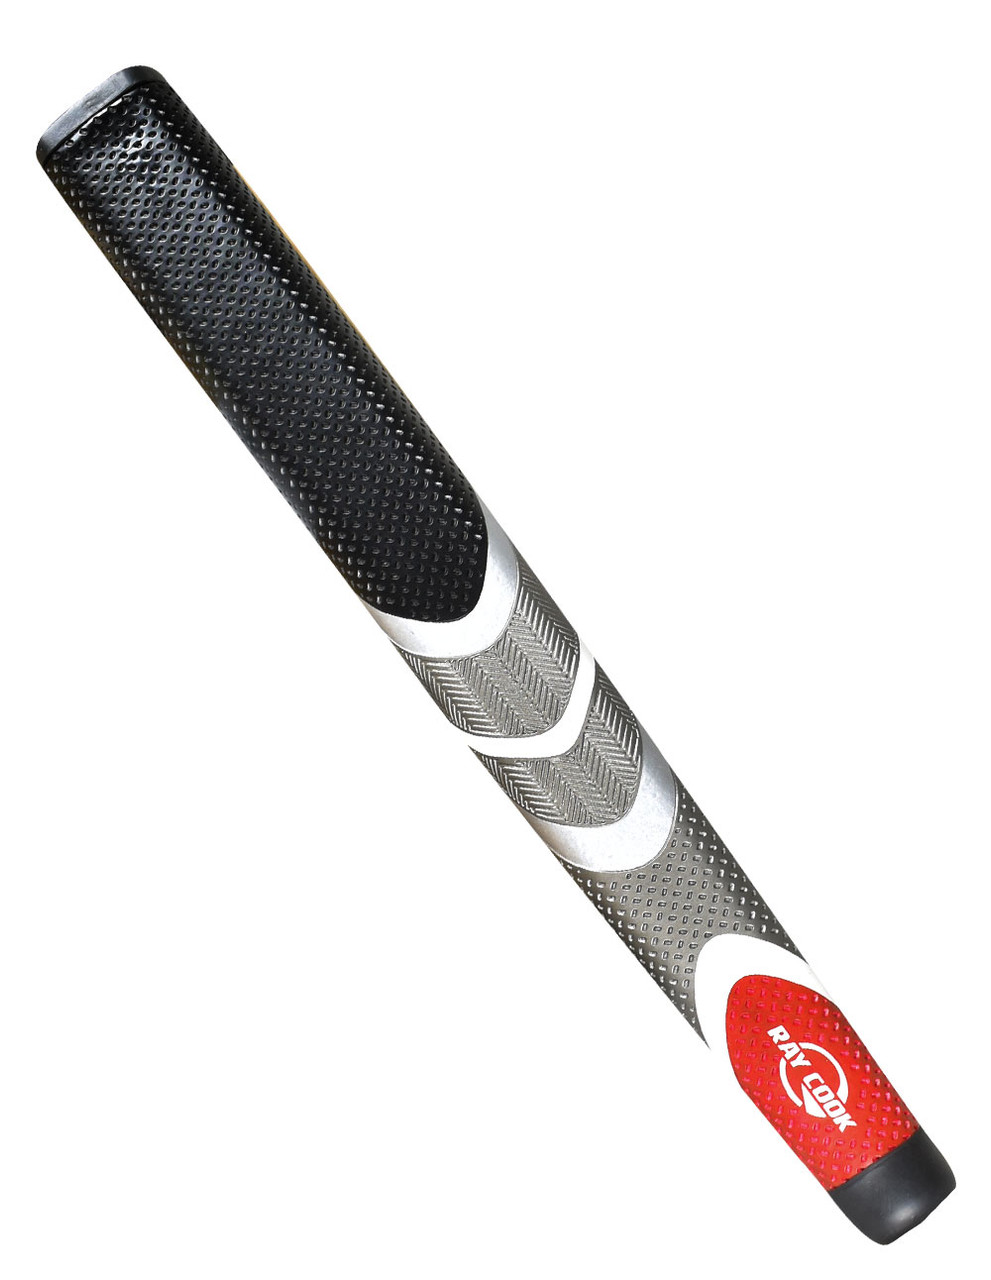 Oversized Putter Grip - Ray Cook Golf